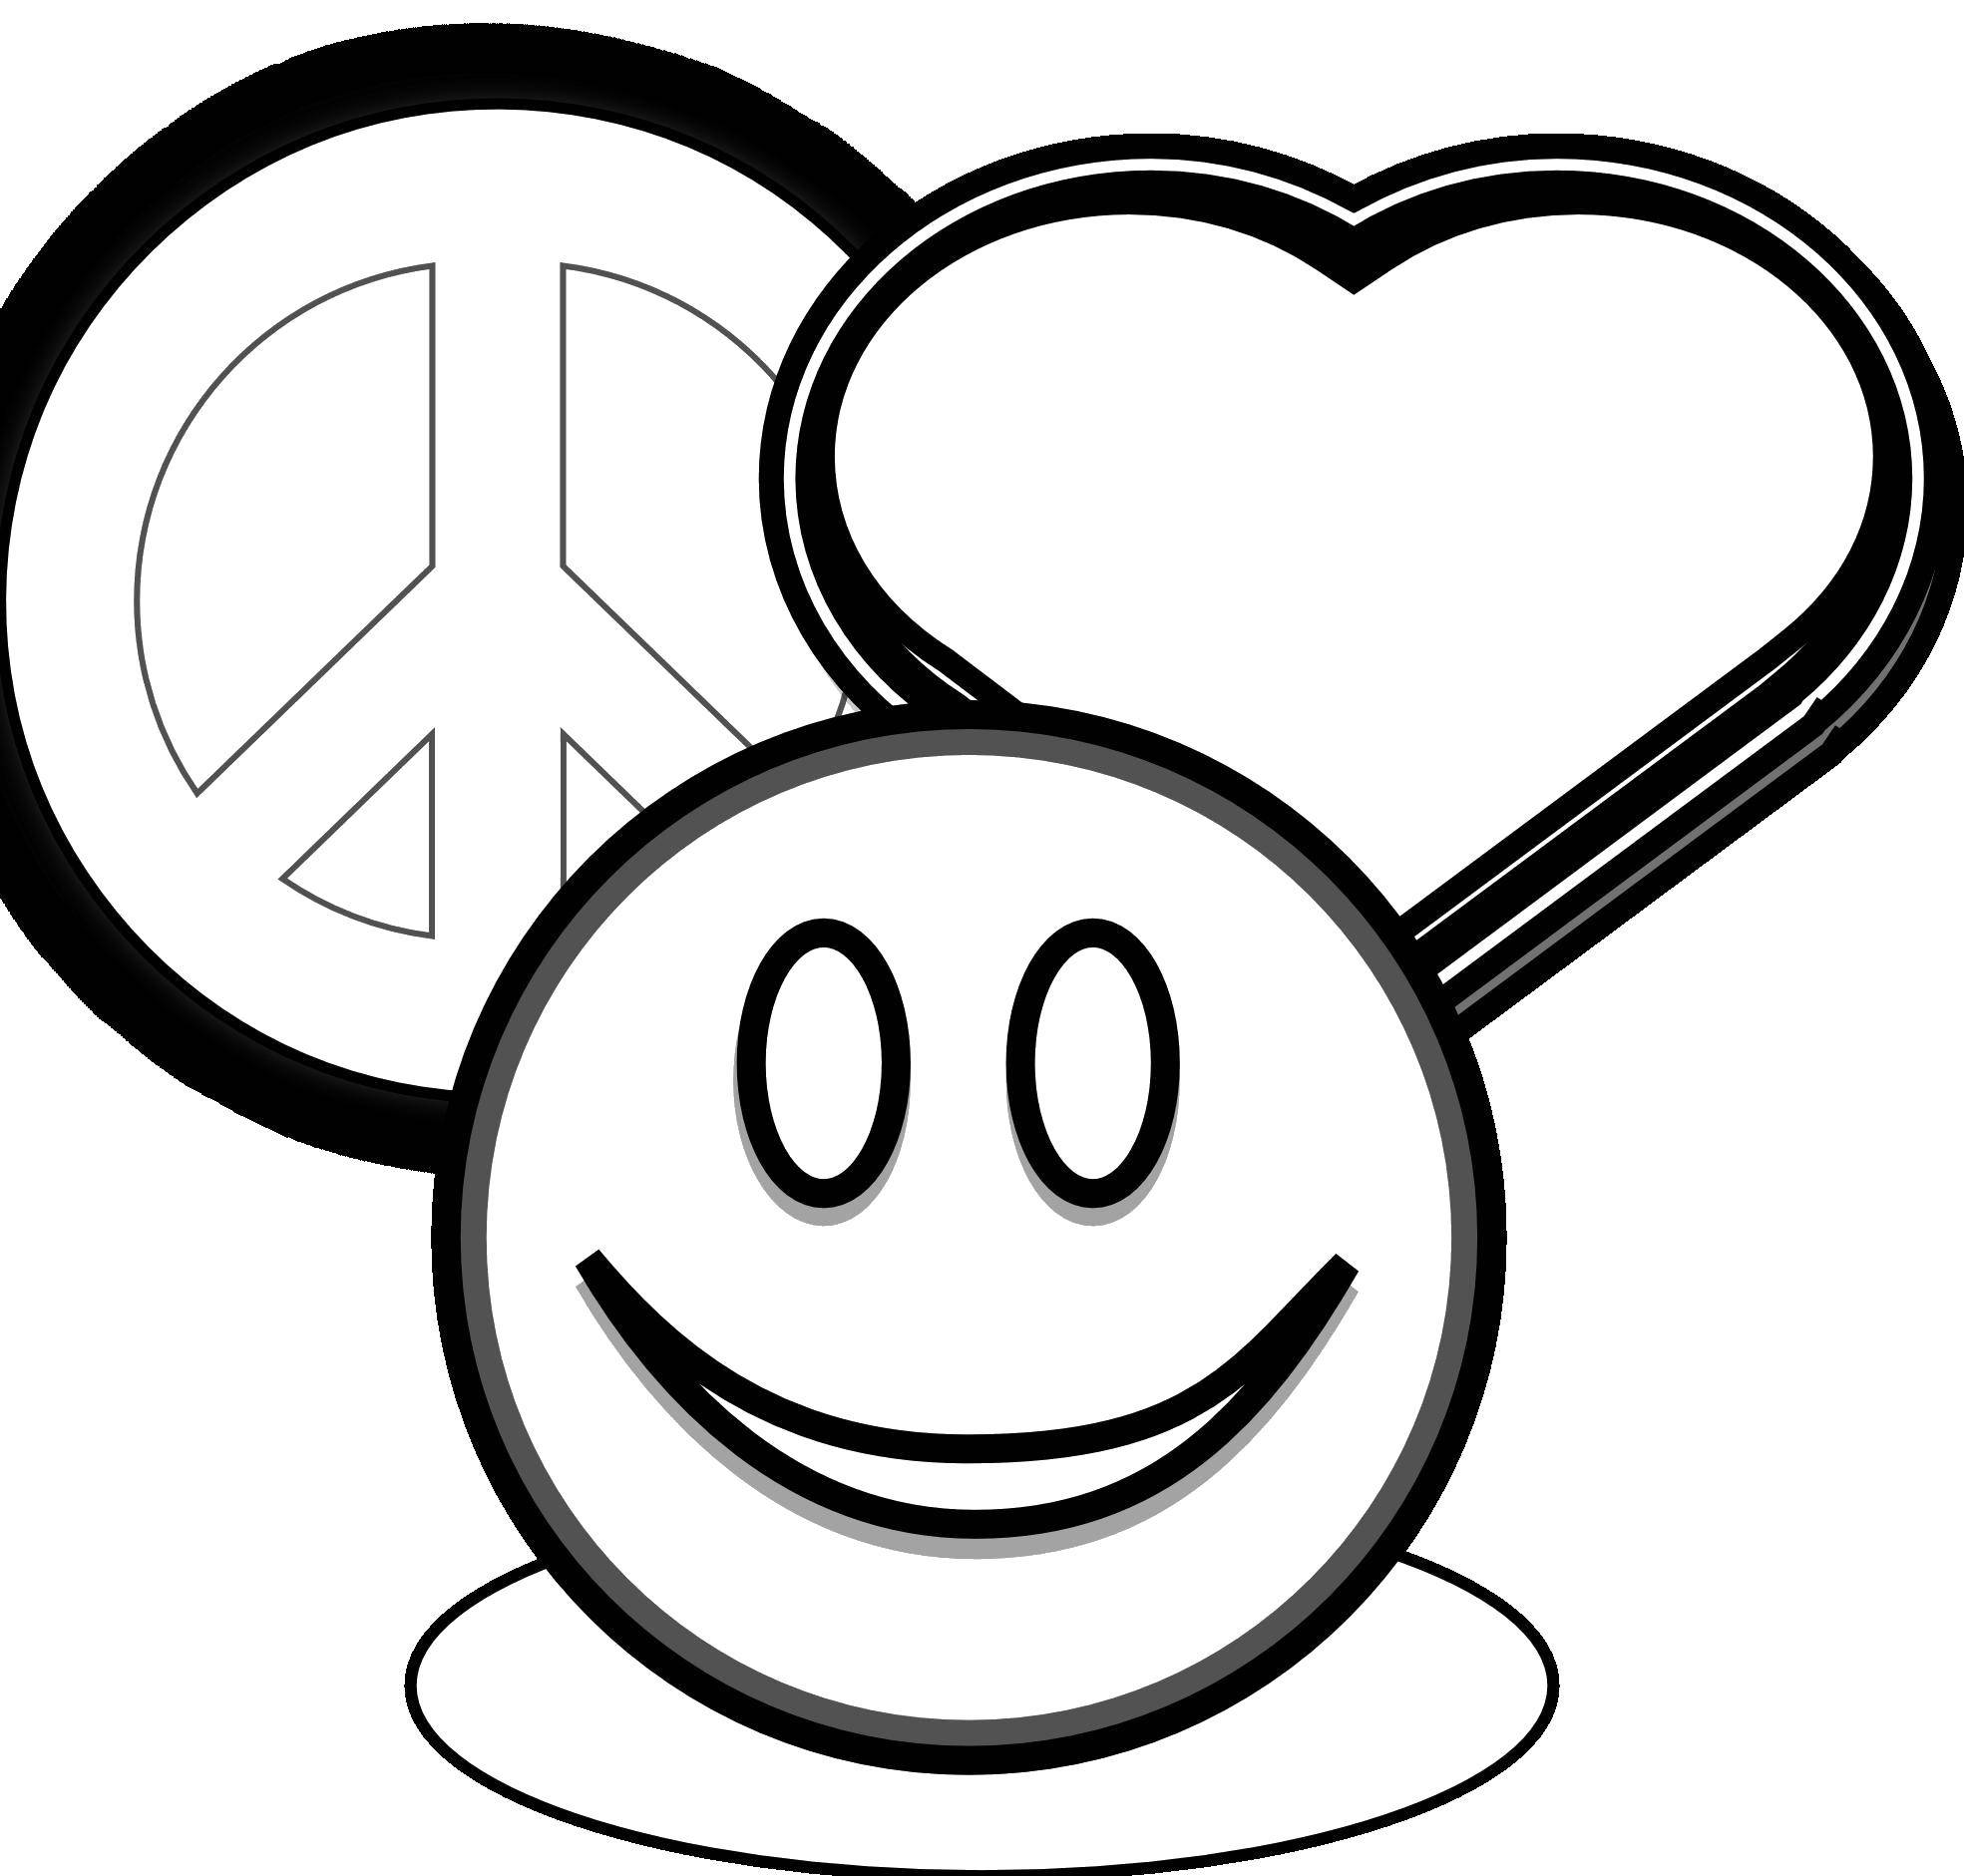 Coloring Sign hippie smile and heart. Category For teenagers. Tags:  Sign, smile, cardio.